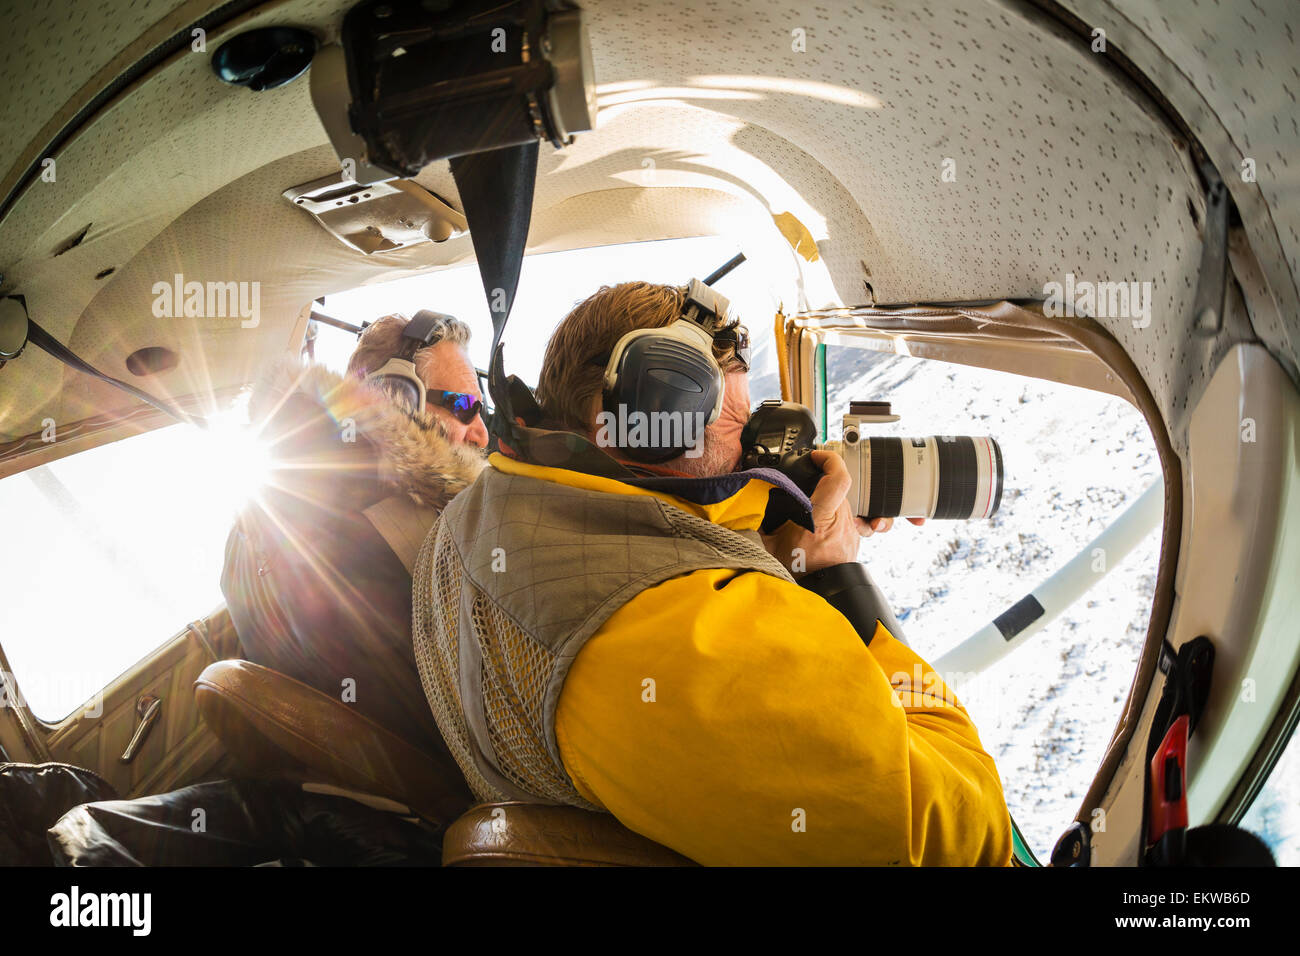 Official Iditarod photographer, Jeff Schultz, photographing from an airplane flying over Kaltag during the 2014 Iditarod, Alaska Stock Photo